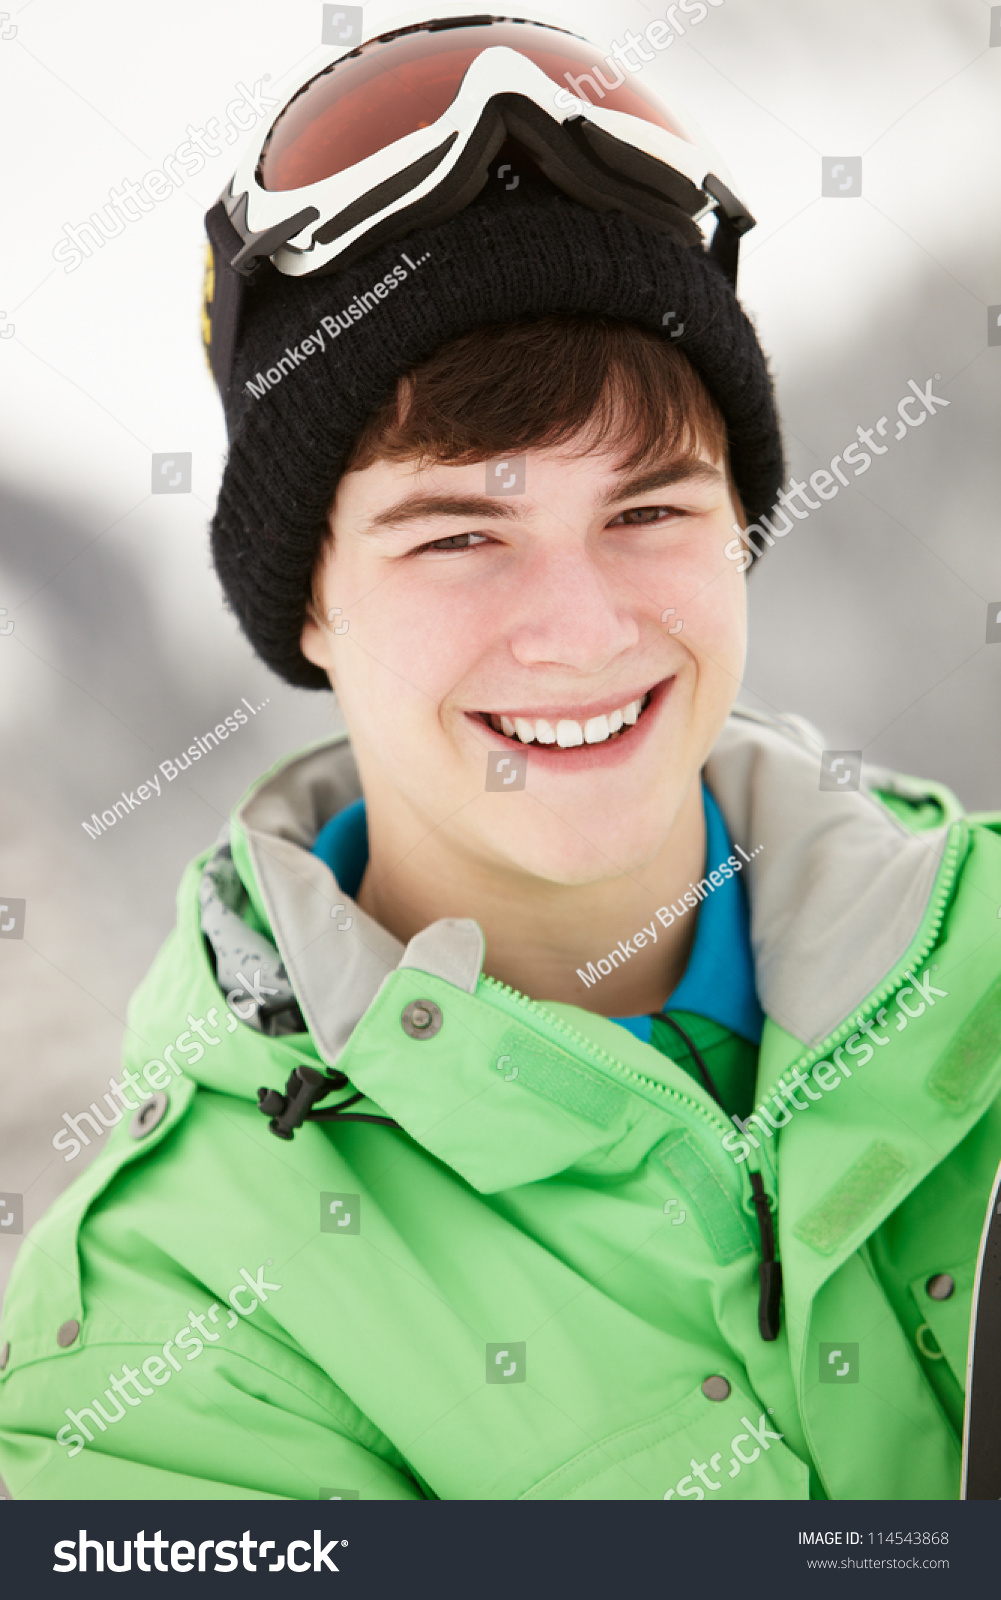 Teenage Boy With Snowboard On Ski Holiday In Mountains Stock Photo ...